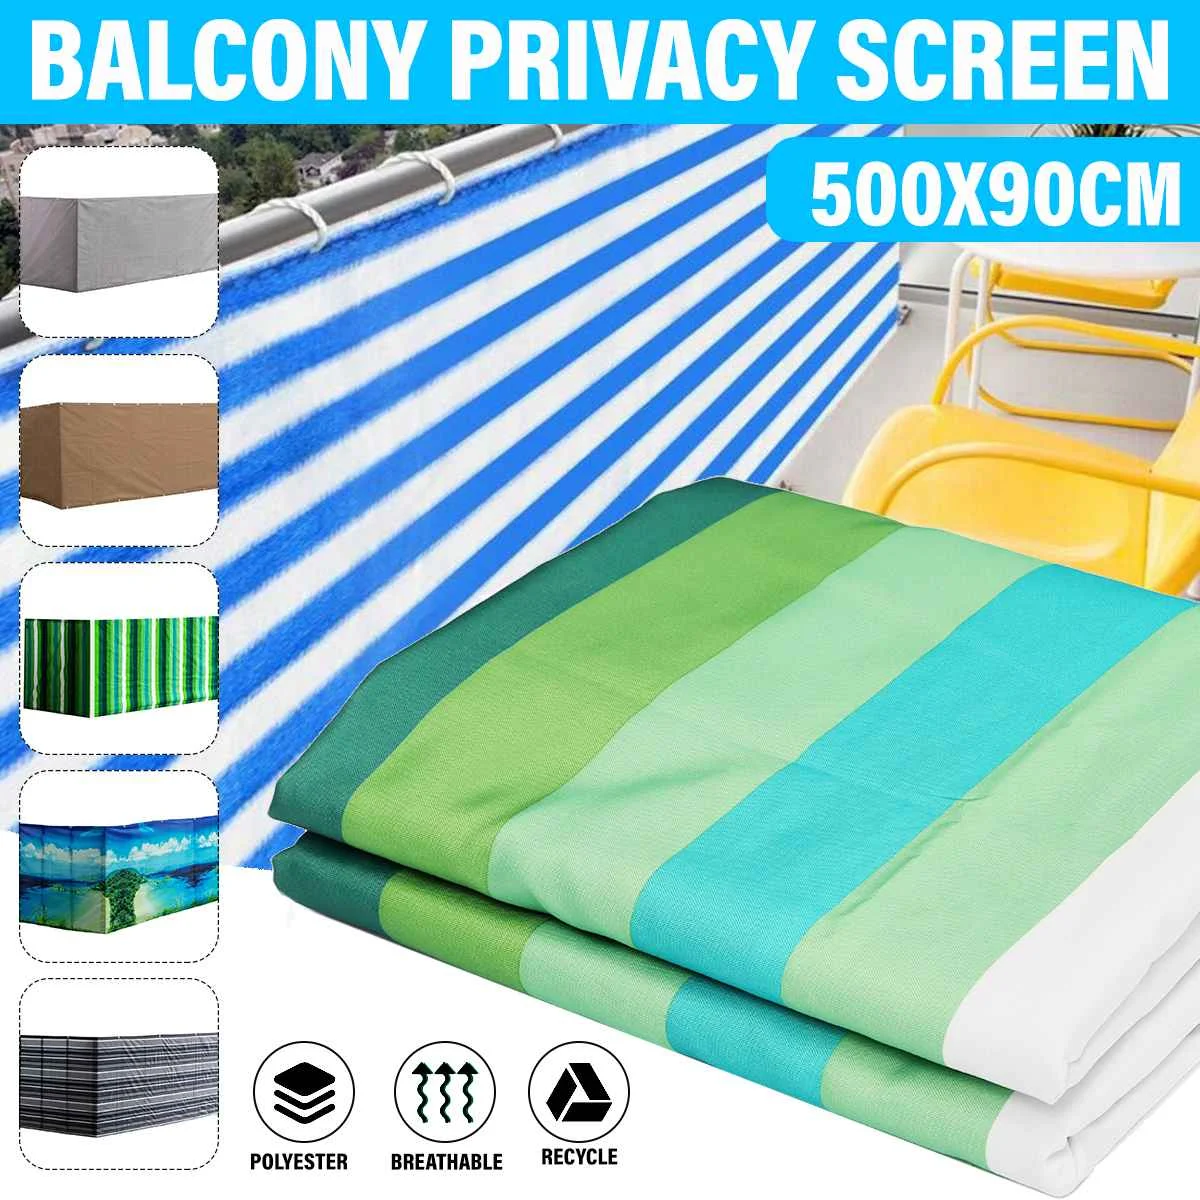 

Home Balcony Privacy Screen with Grommets Fence Deck Shade Sail Yard Cover UV Sunblock Wind Child Safe Protection Summer Supply